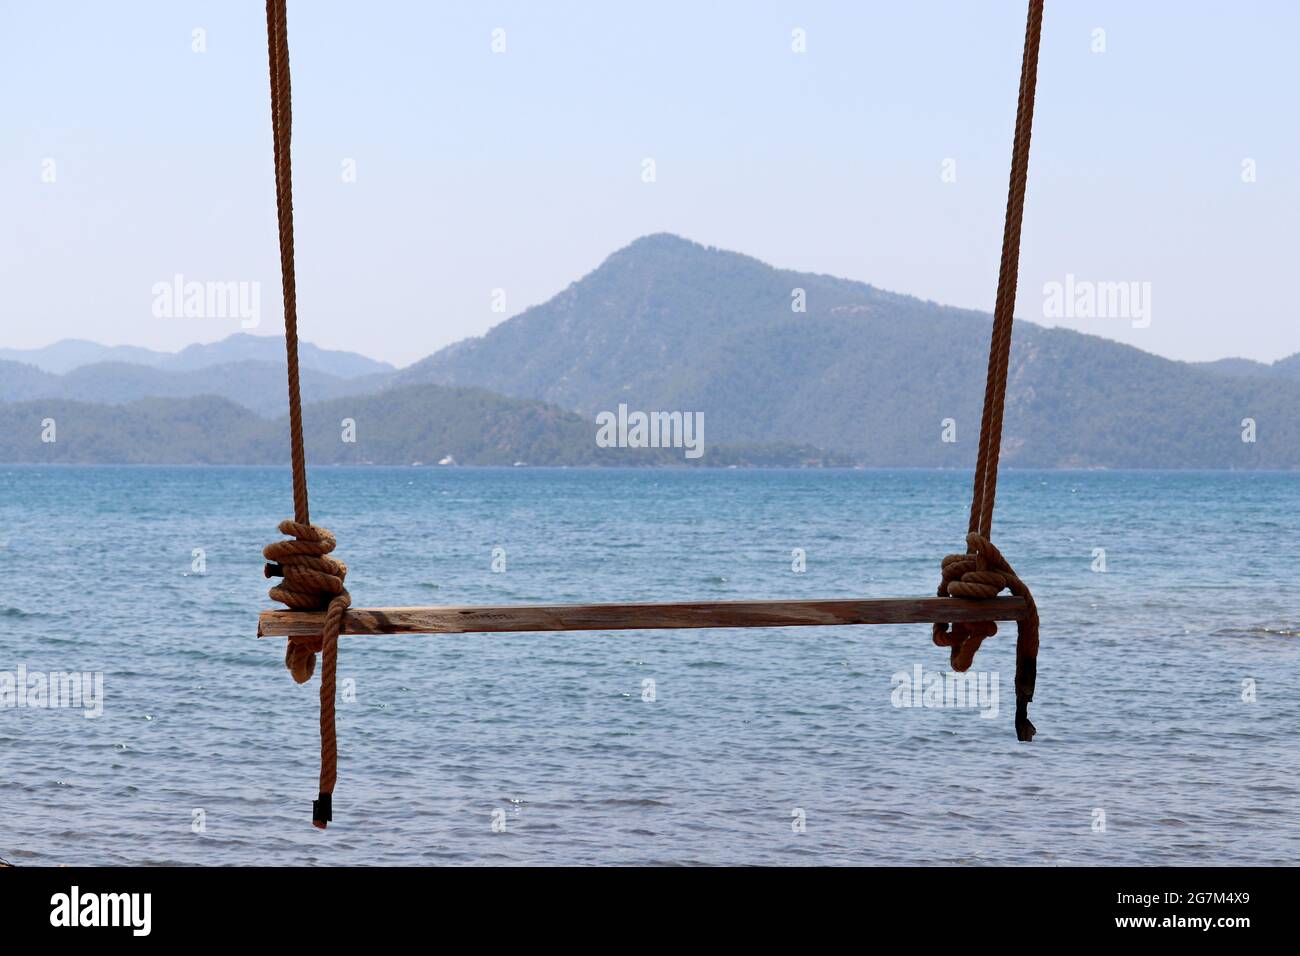 Wooden swing on a ropes against the blue sea and mountains in fog. Beach holidays on summer resort Stock Photo